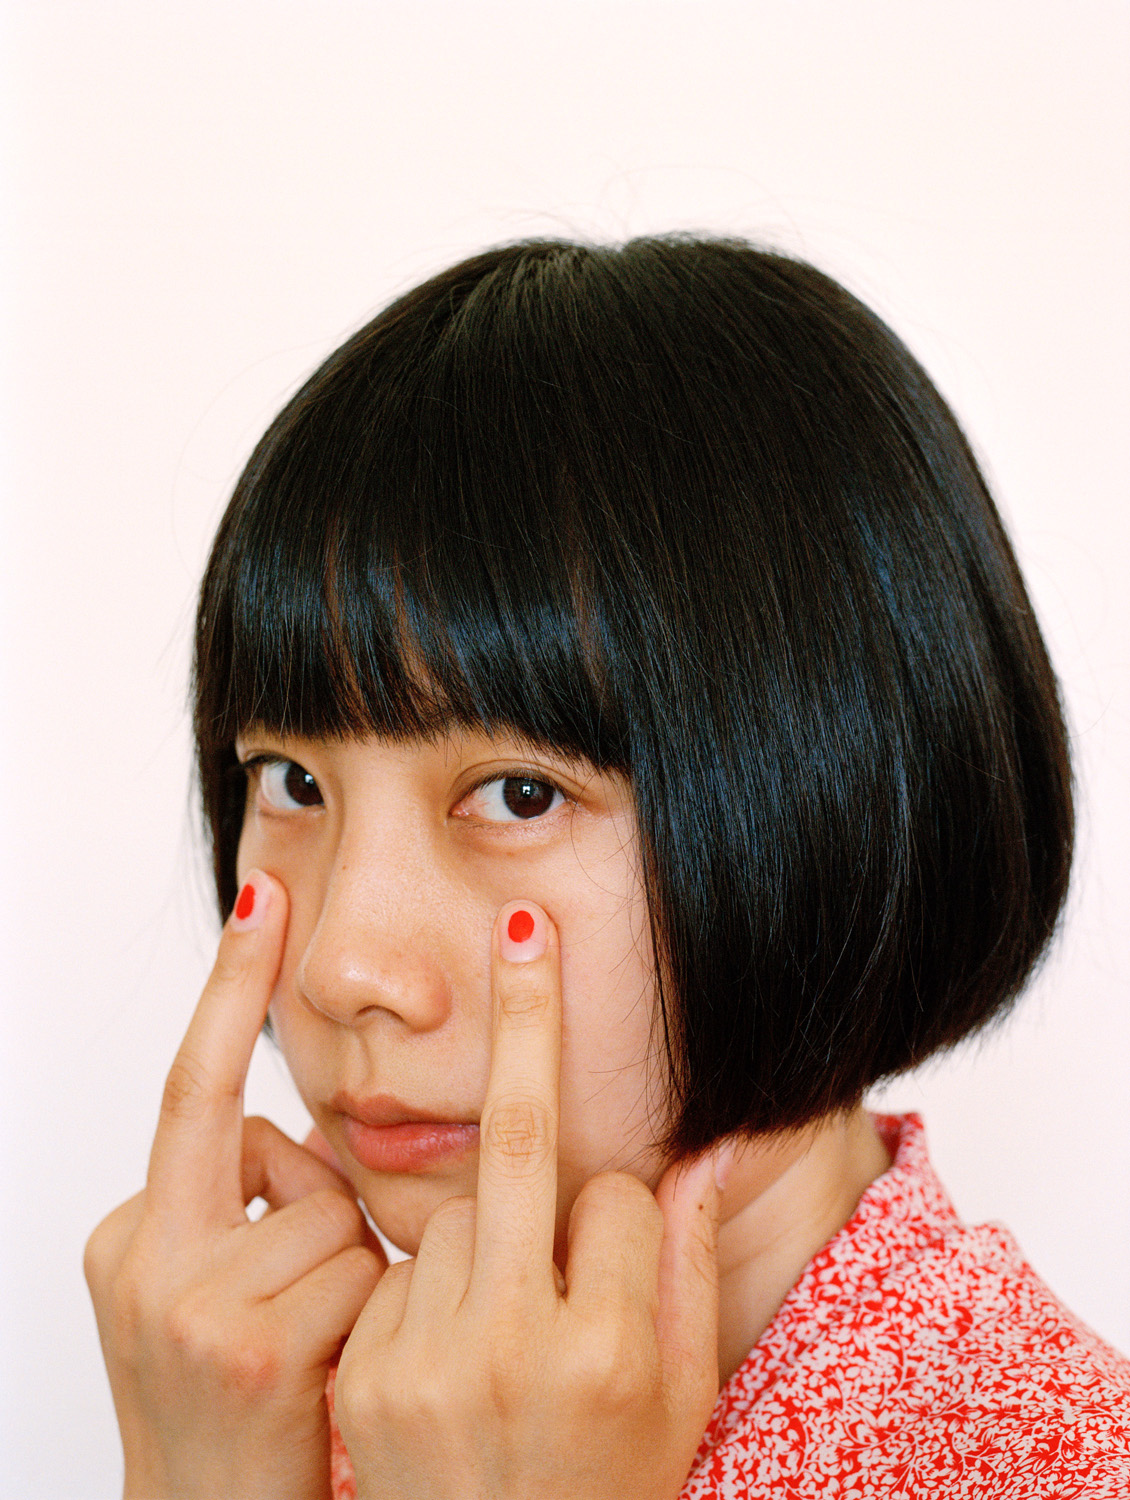 “Red Nails, 2014”, from For Your Eyes Only series © Pixy Liao